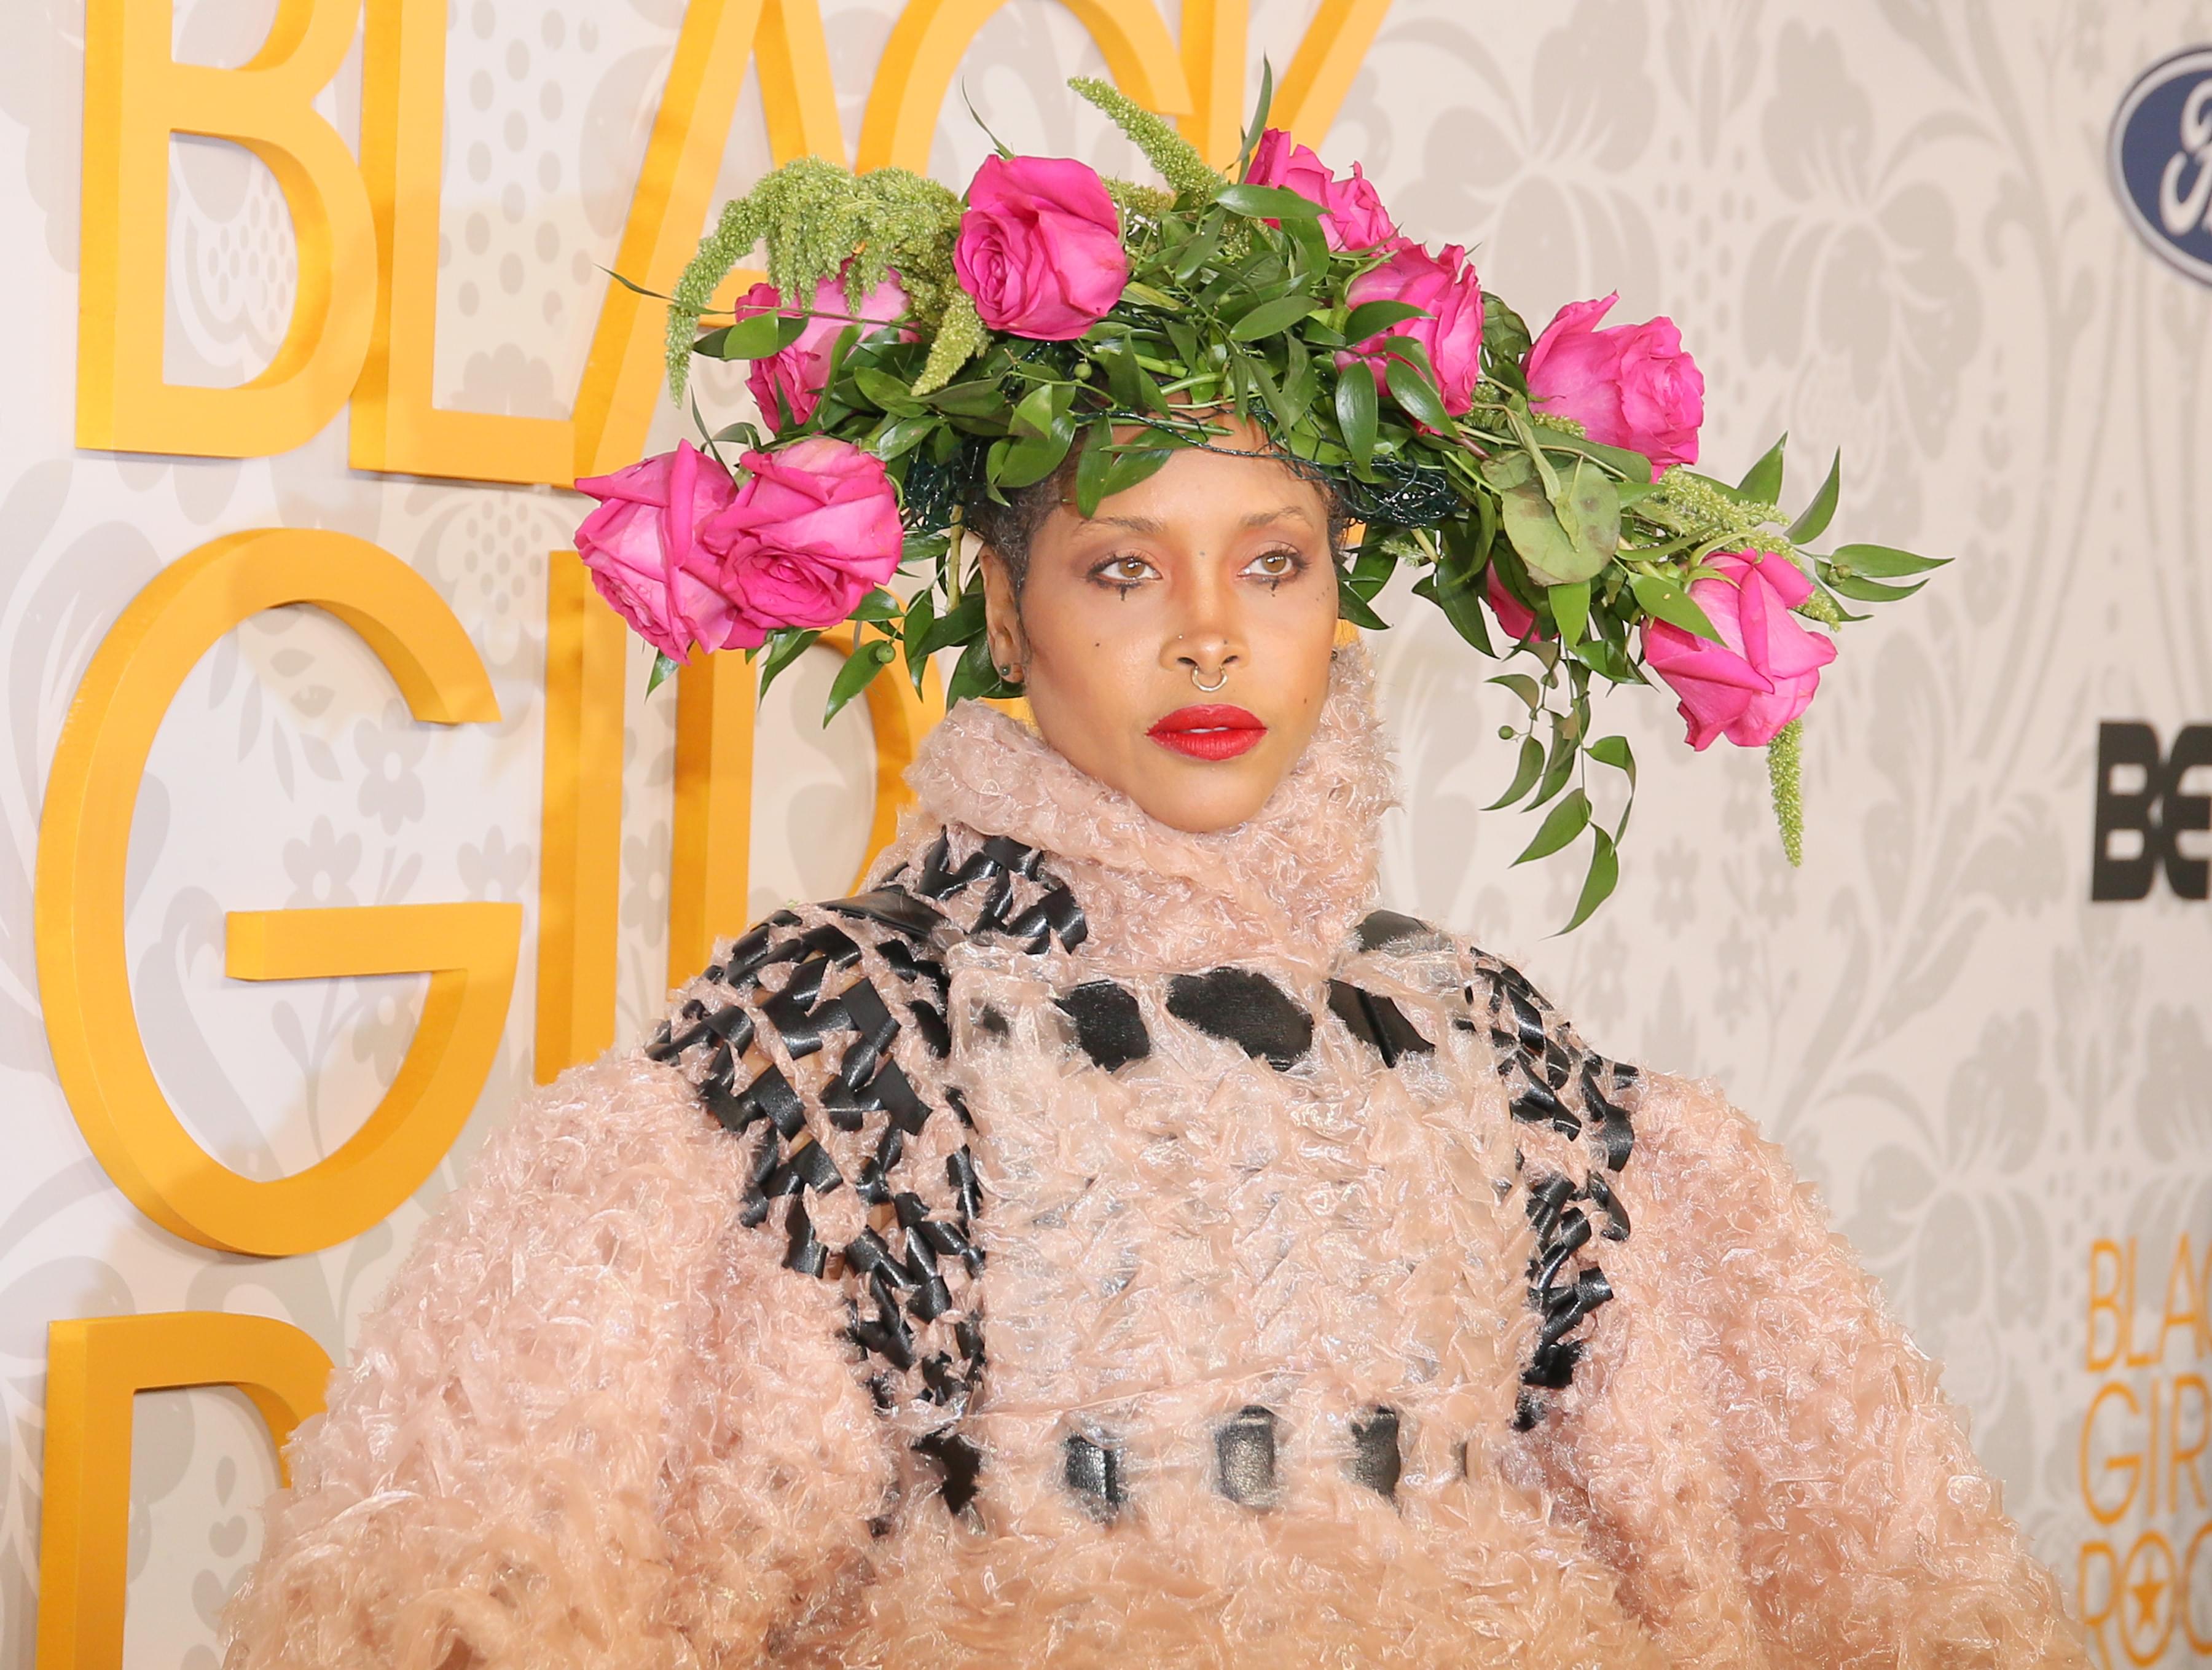 Erykah Badu To Release A Perfume That Will Smell Like Her Lady Garden.